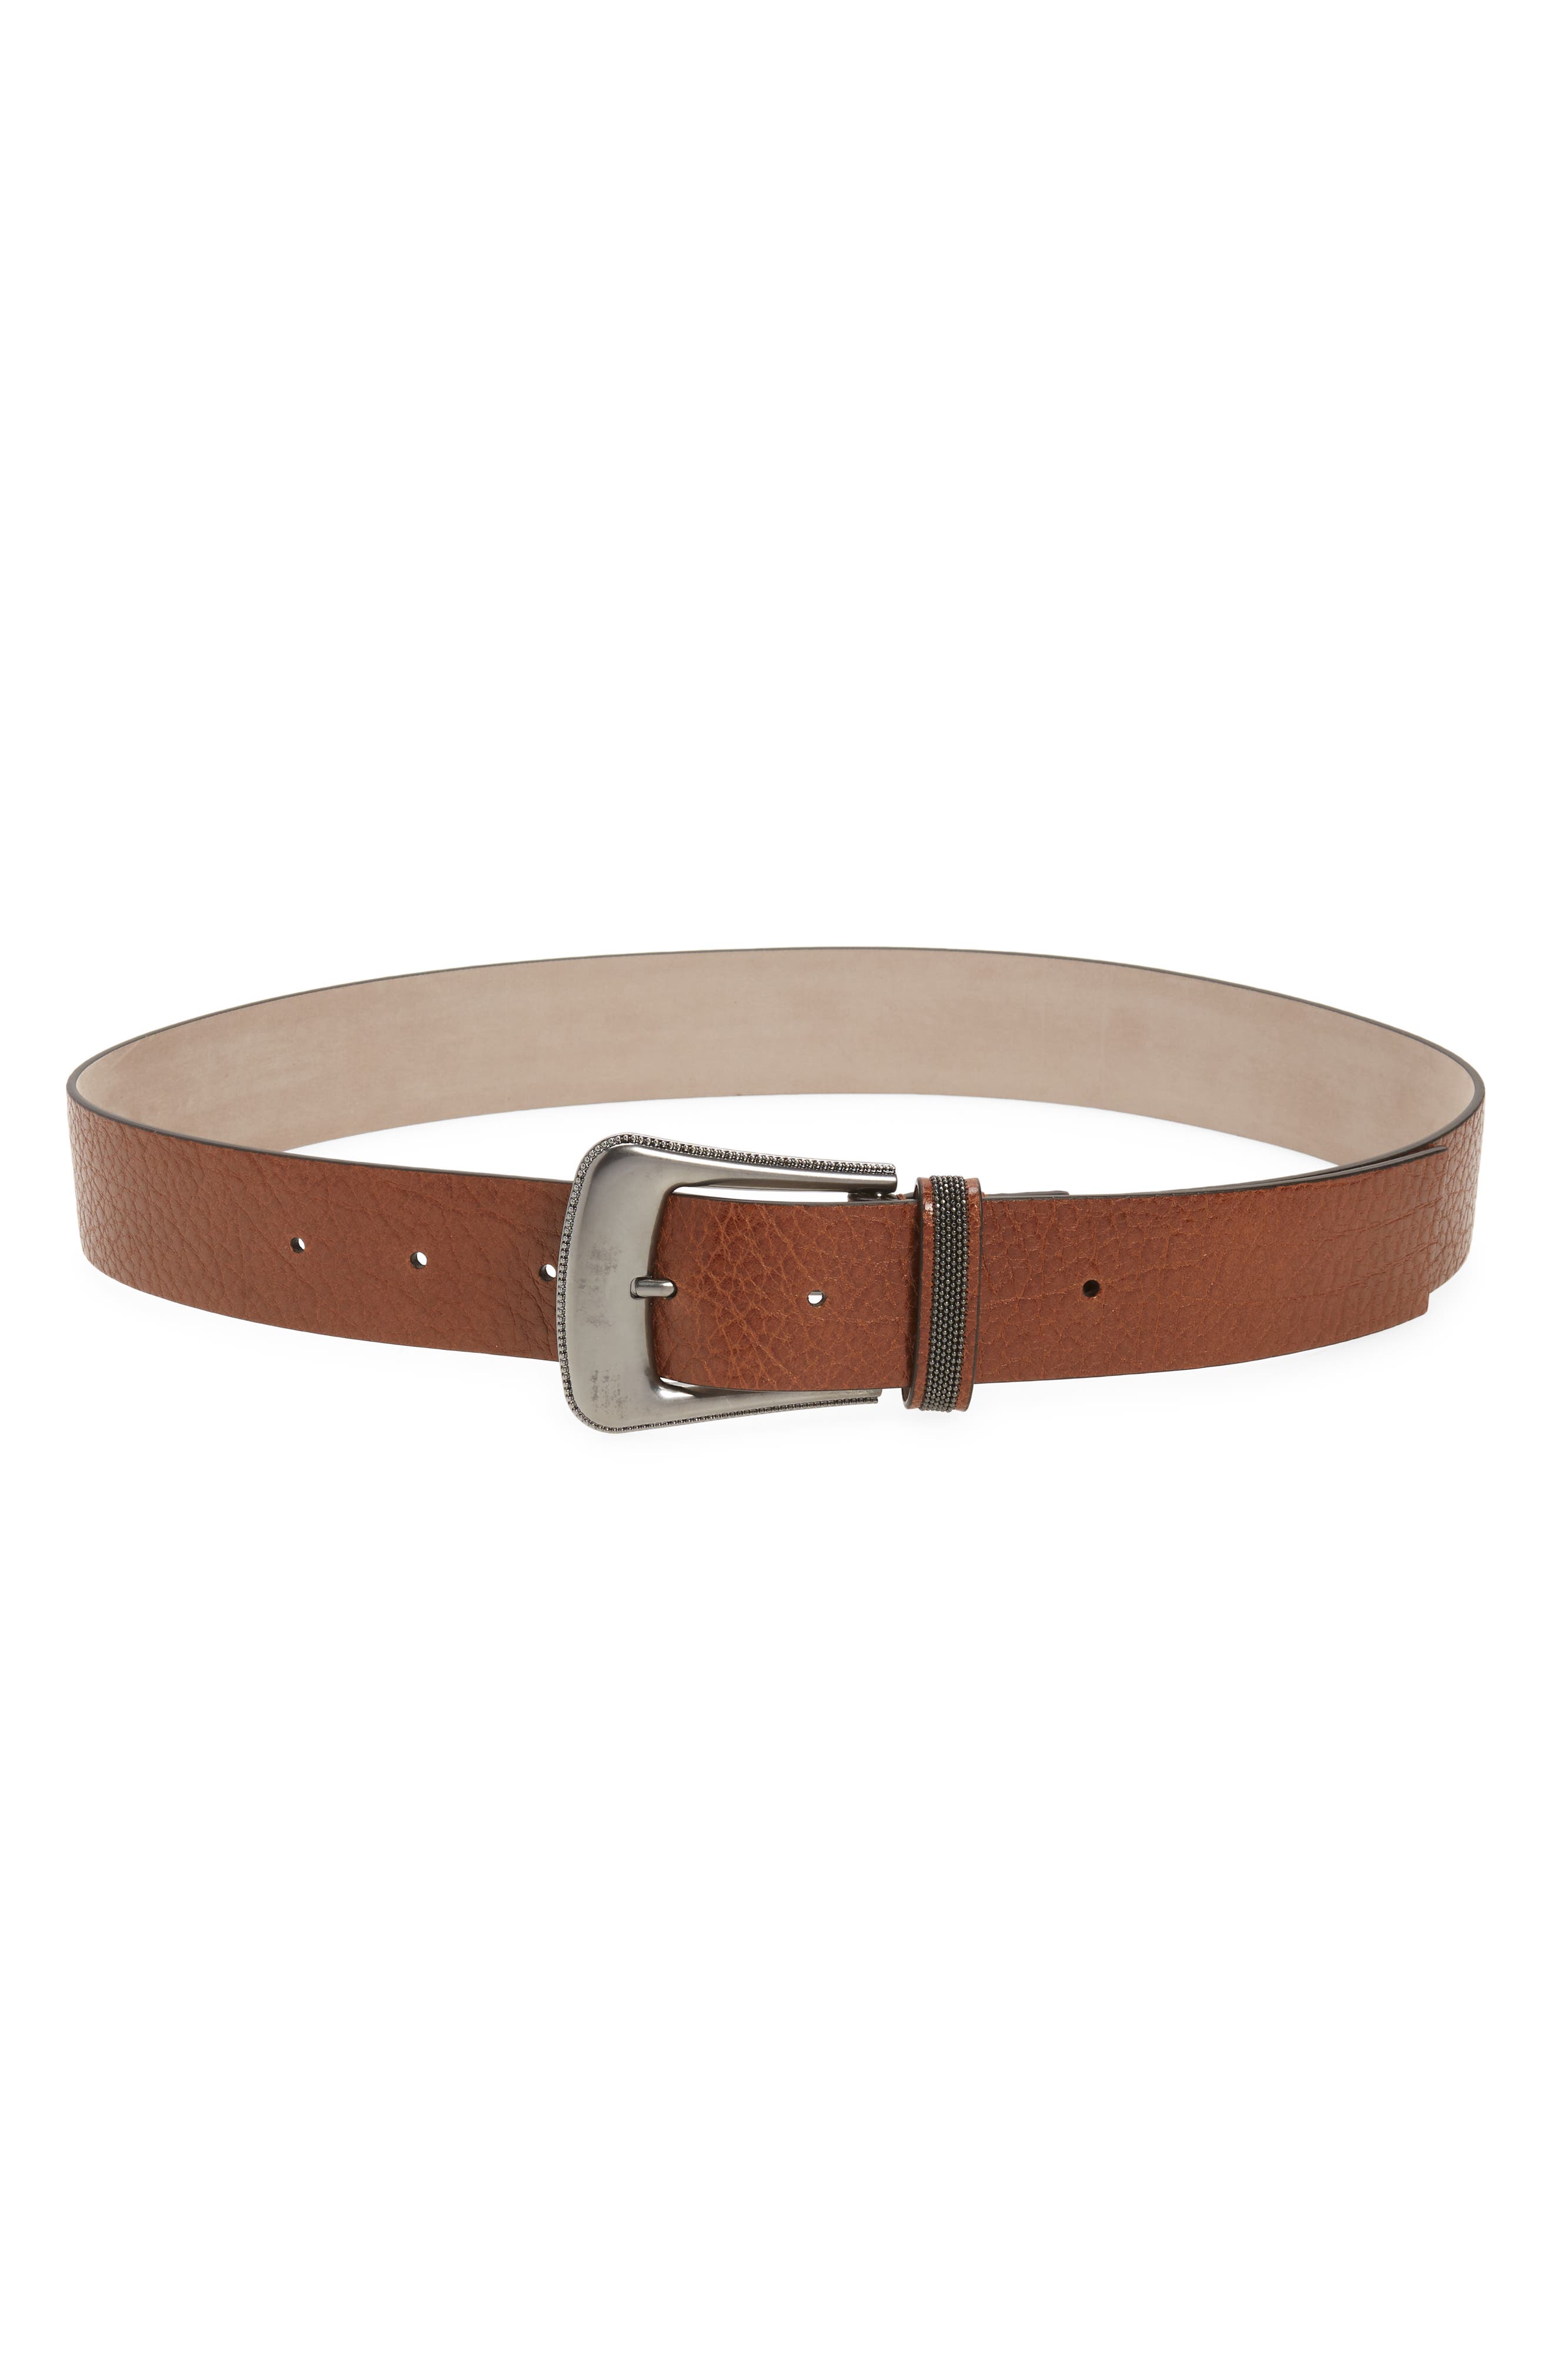 NWT $505 BRUNELLO CUCINELLI WOMENS COTTON AND LEATHER WAIST BELT SIZE M 